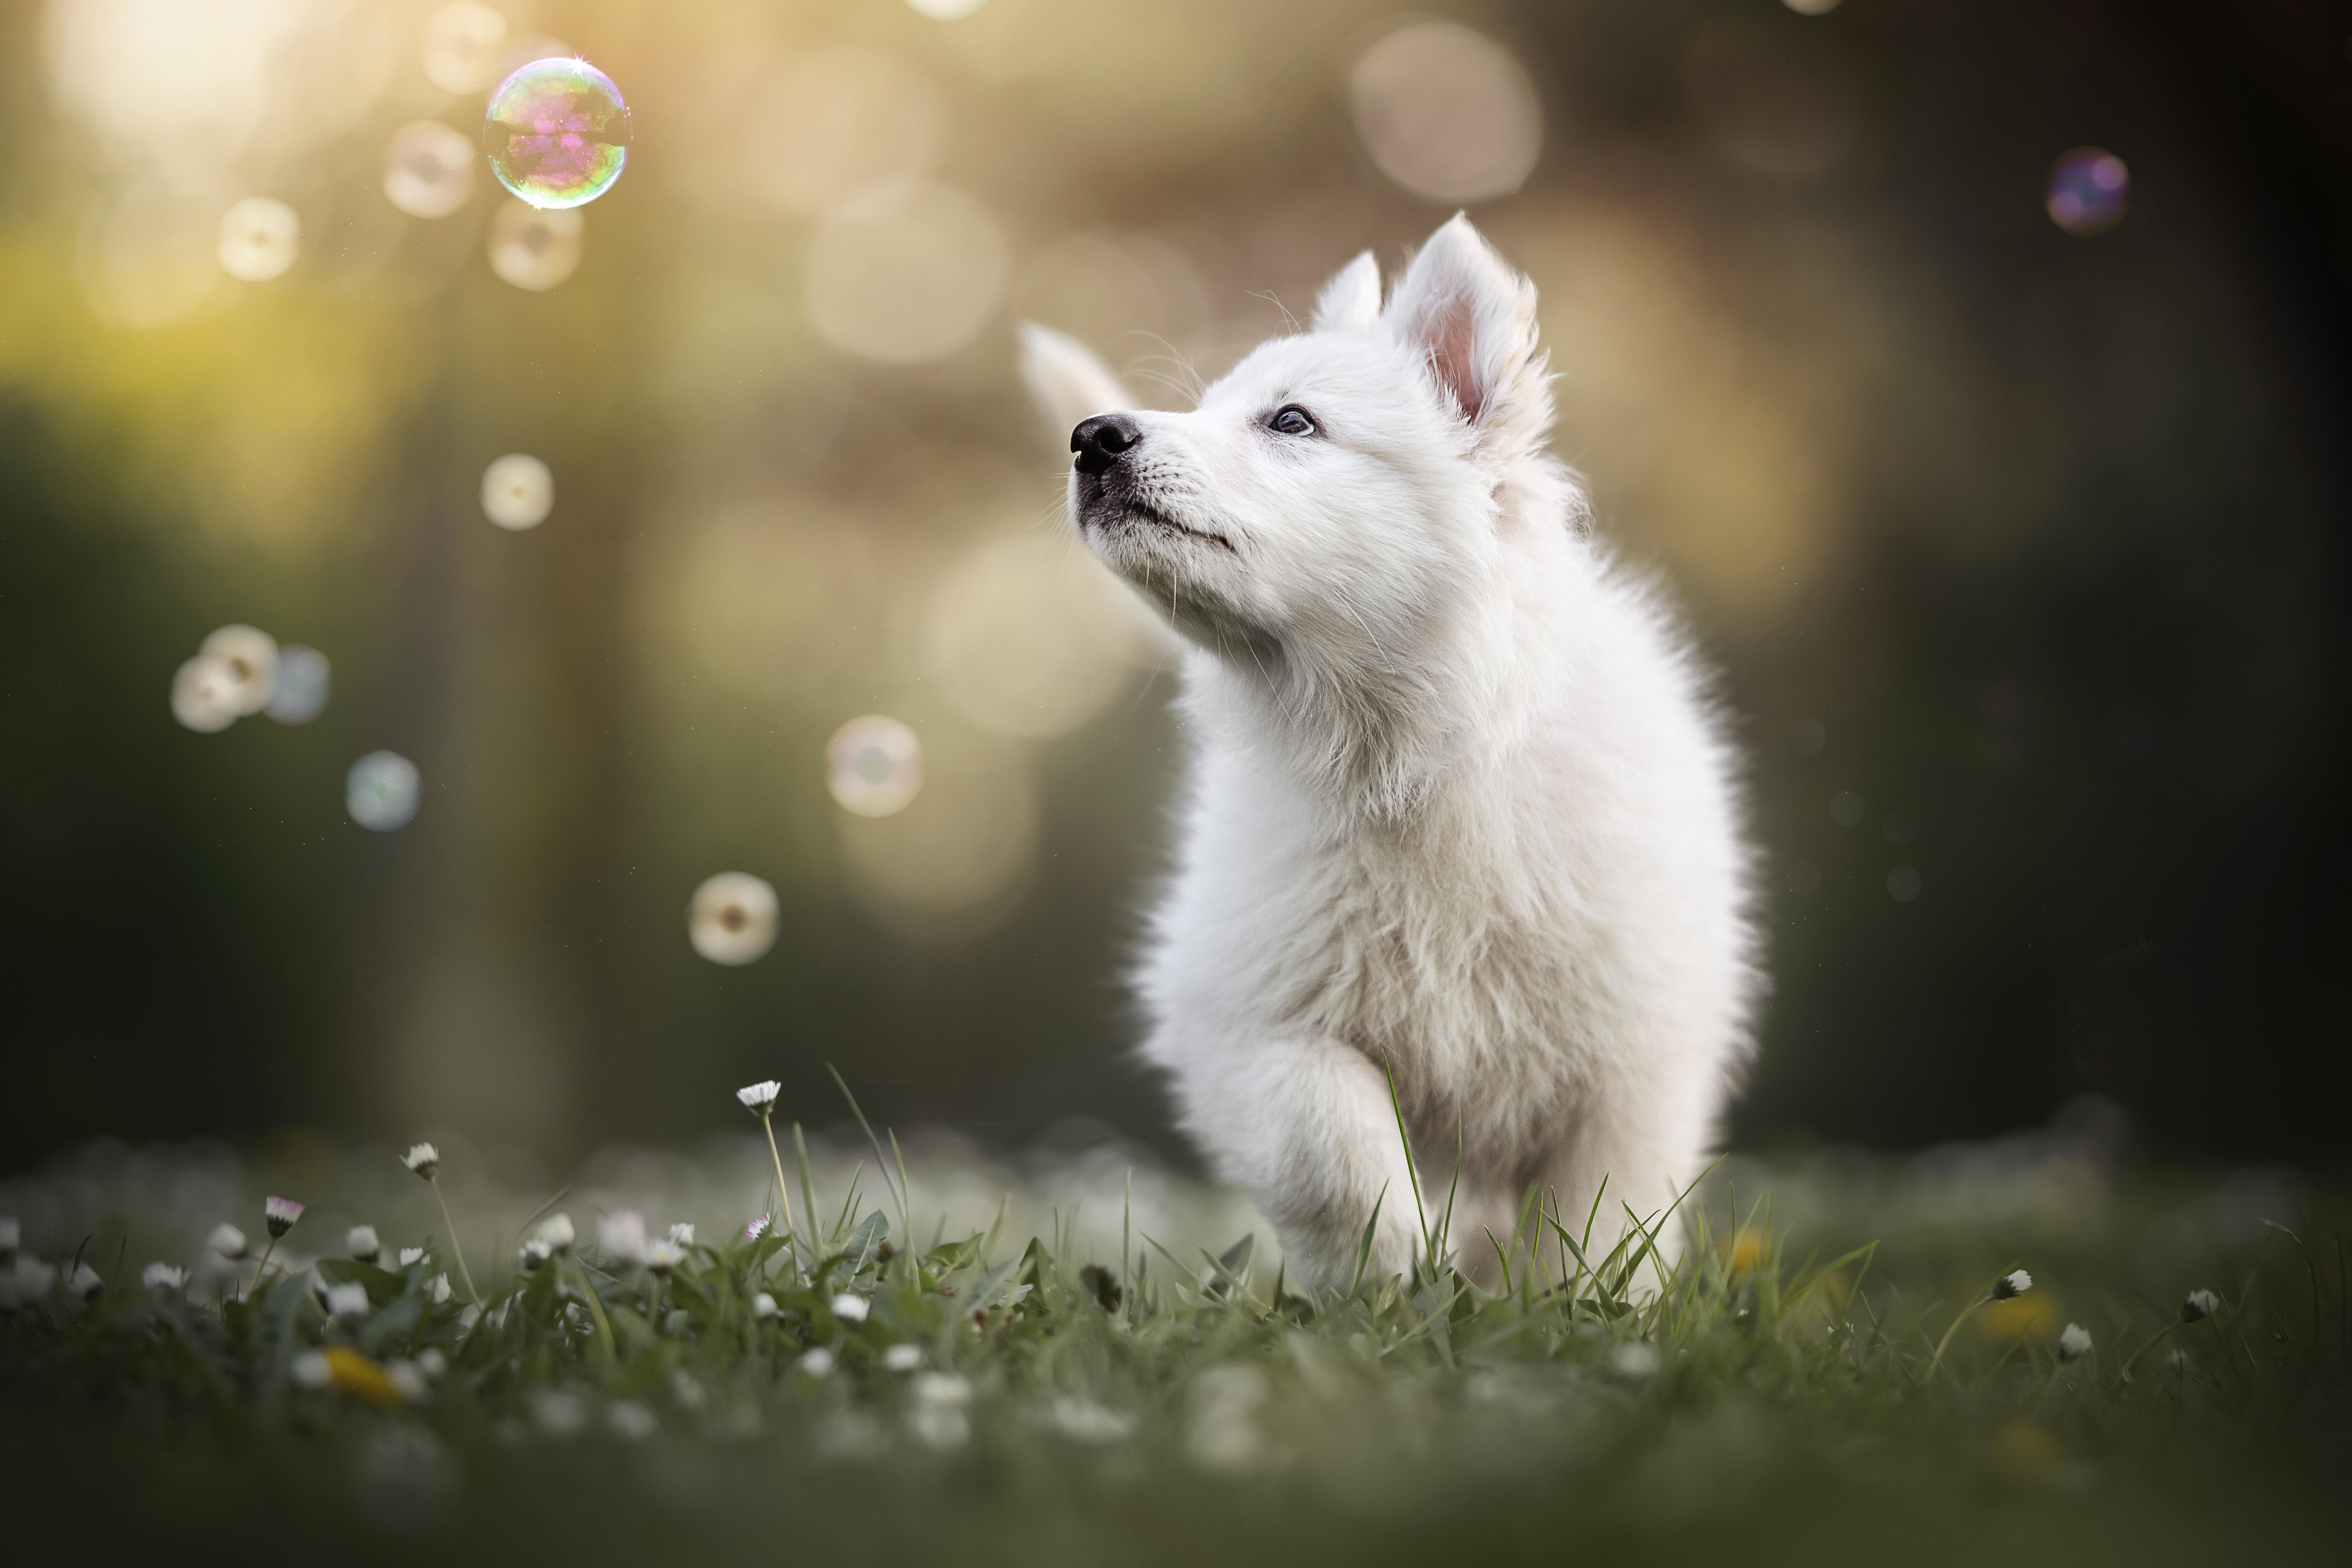 Cute Dog 4k Wallpapers - Top Free Cute Dog 4k Backgrounds ...